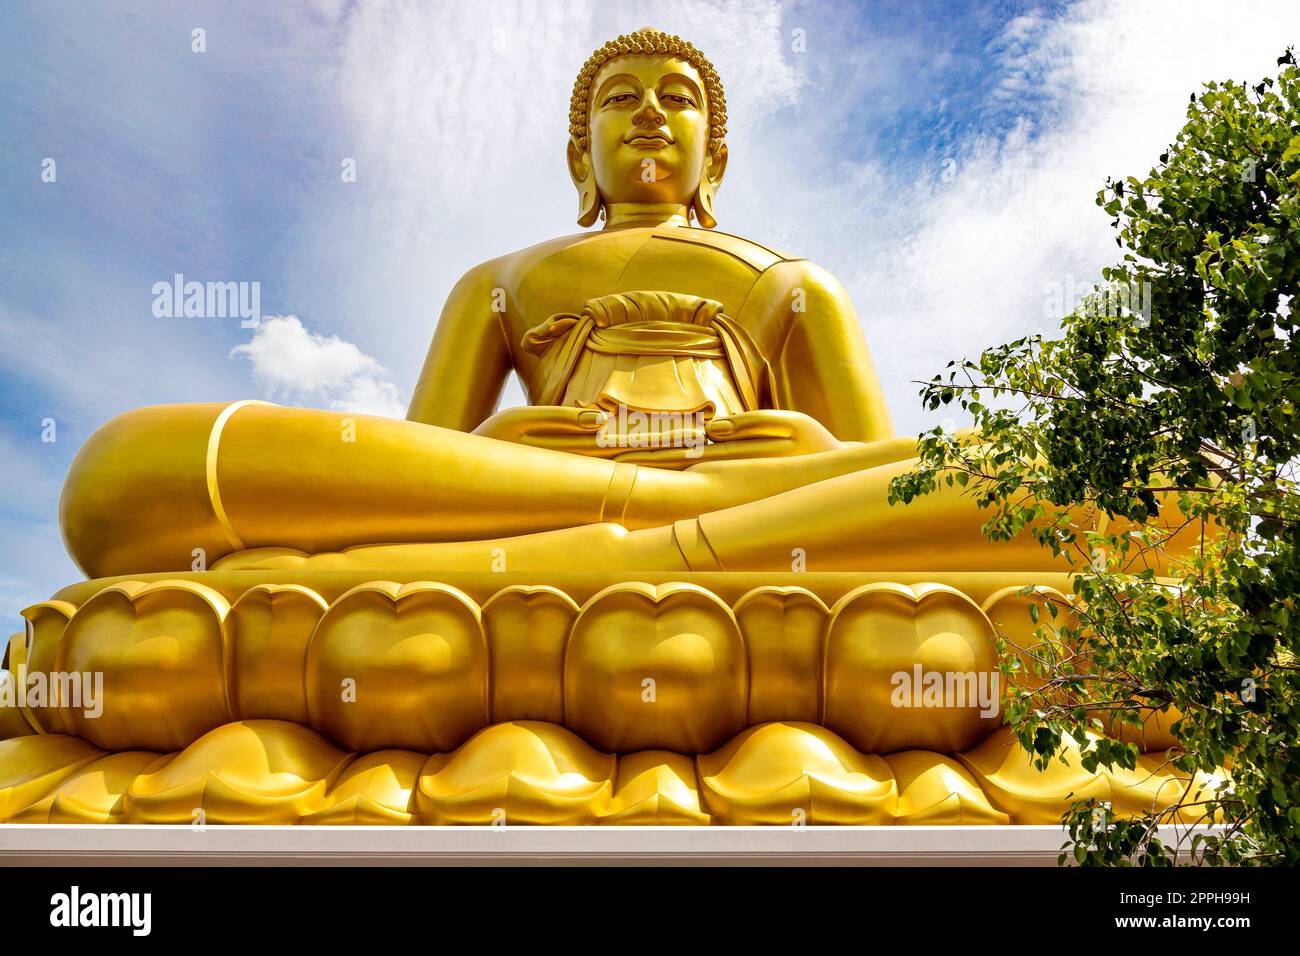 'Phra Buddha Dhammakaya Thep Mongkol' is a Big golden buddha statue made of copper, as tall as a 20-storey building (69 meters), located at Wat Paknam Bhasicharoen. Bangkok, Thailand on a sunny day Stock Photo